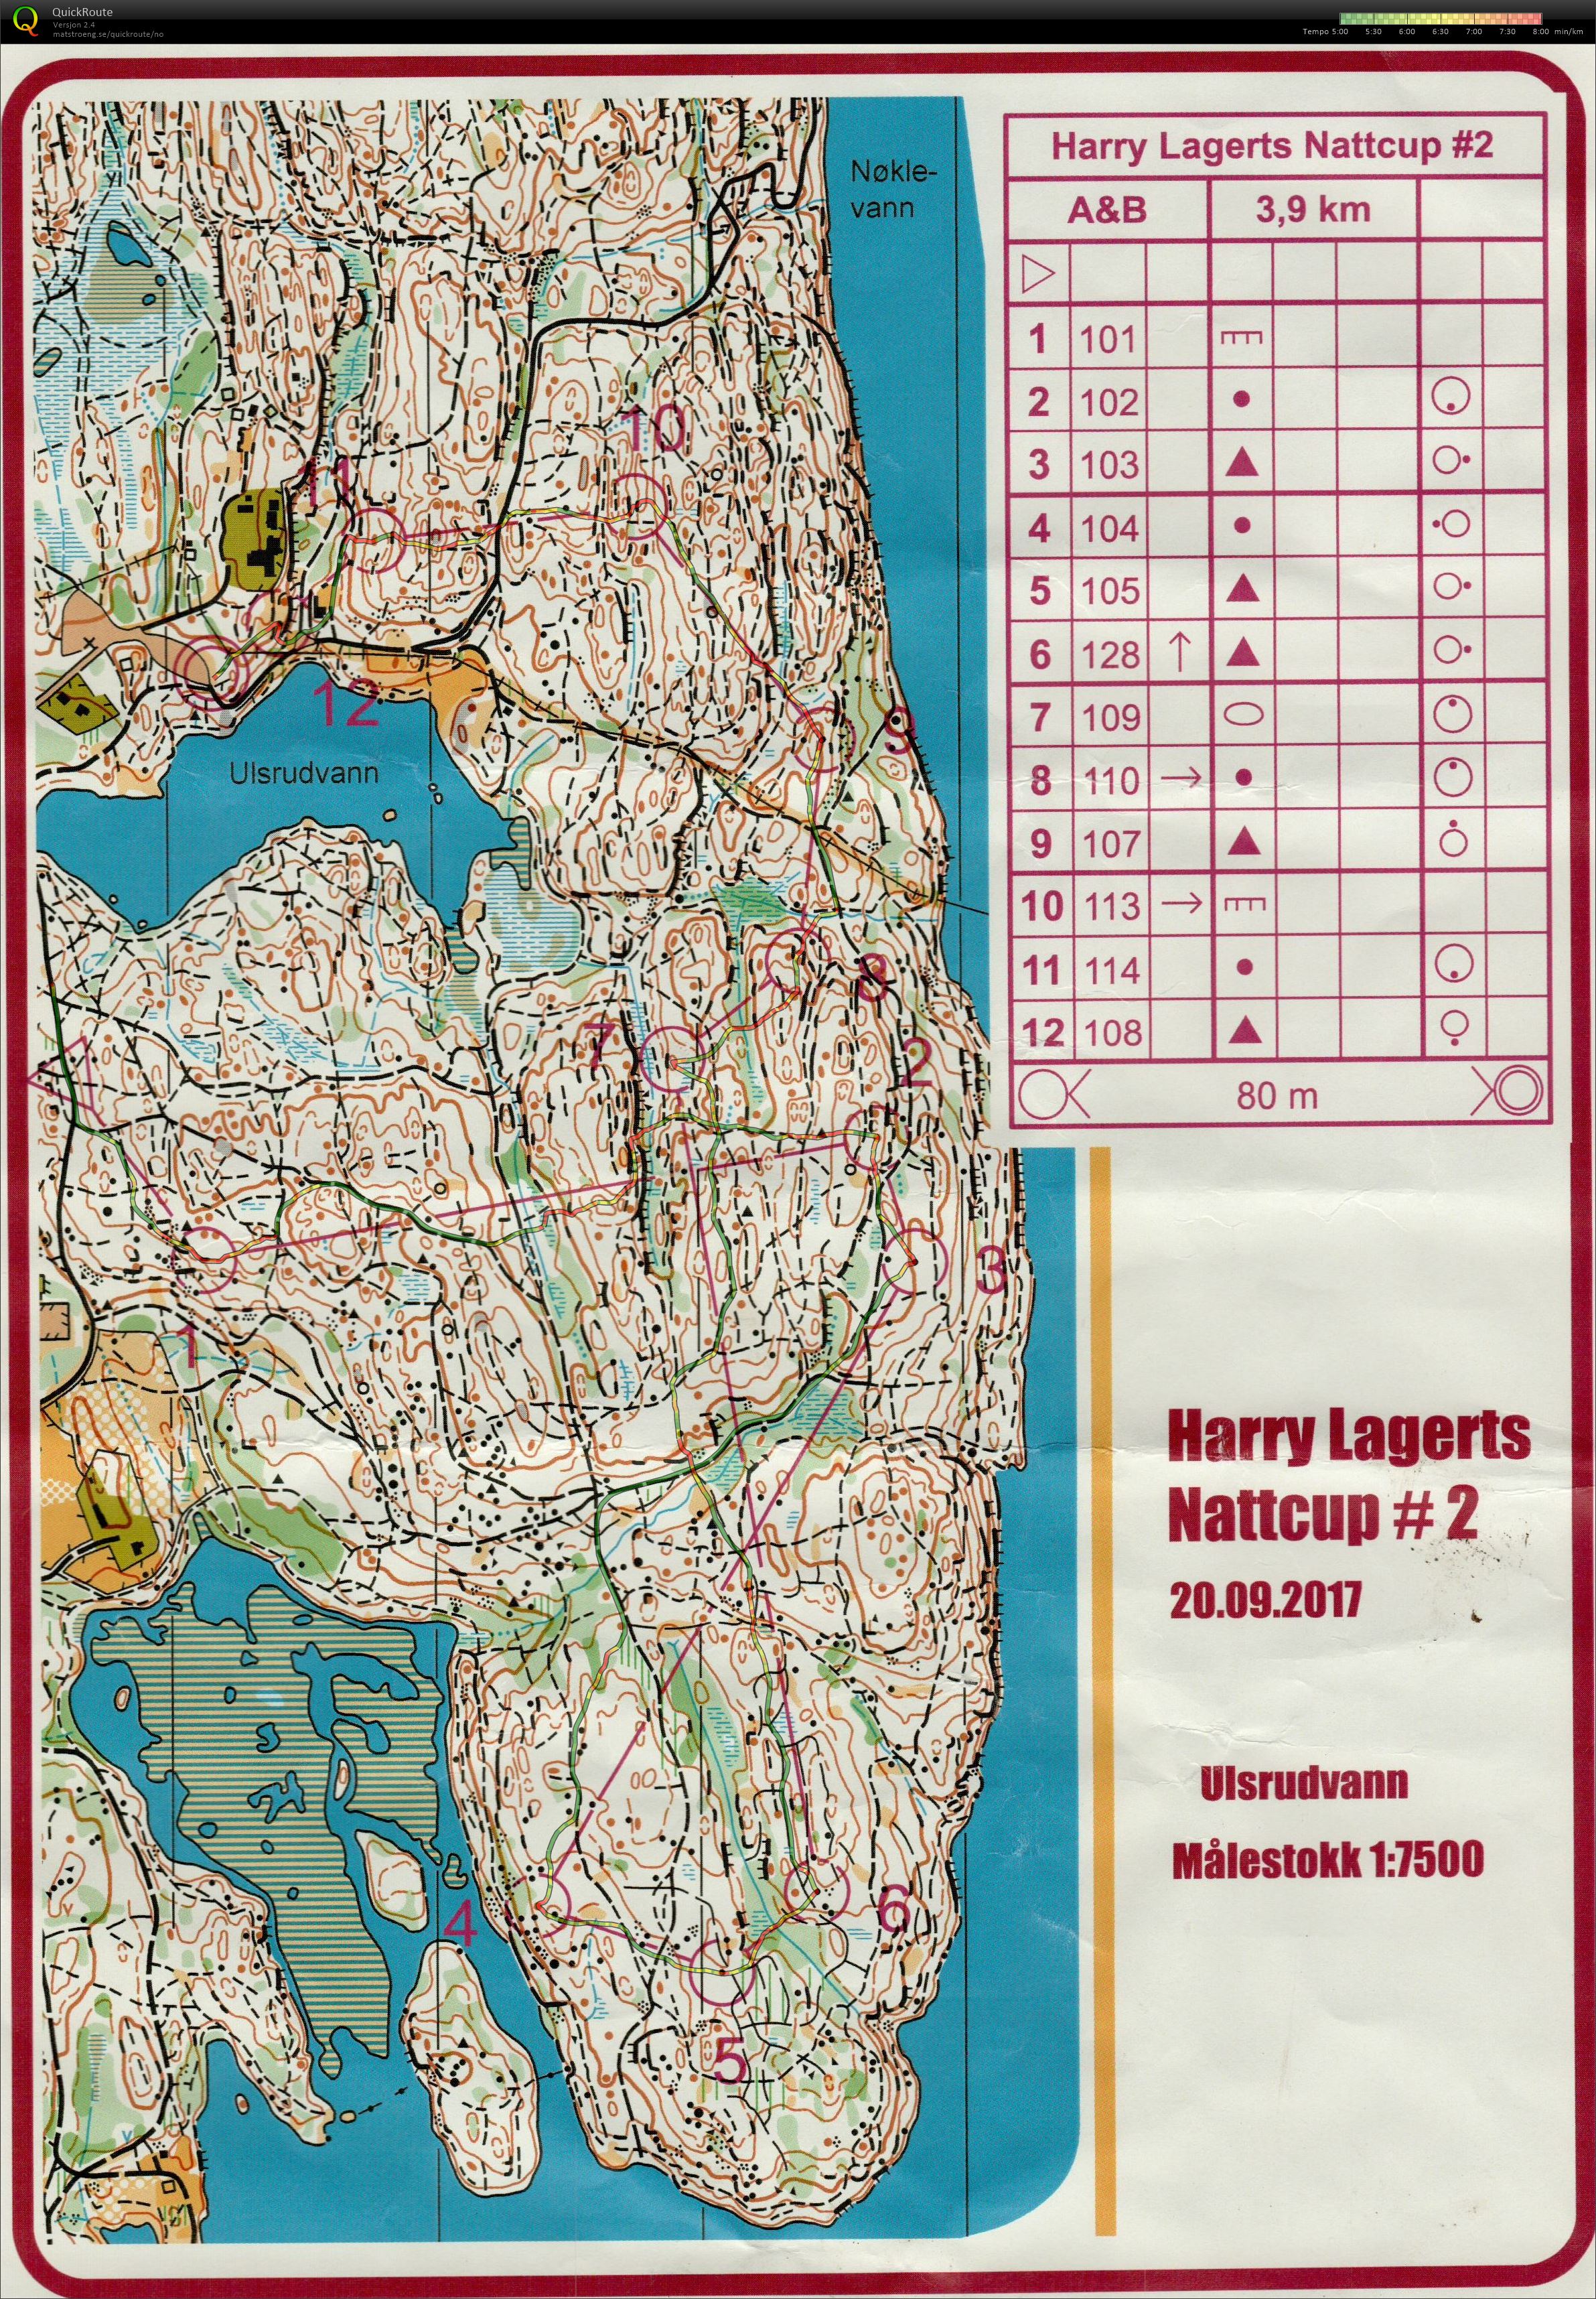 Harry Lagerts Nattcup #2 (20/09/2017)